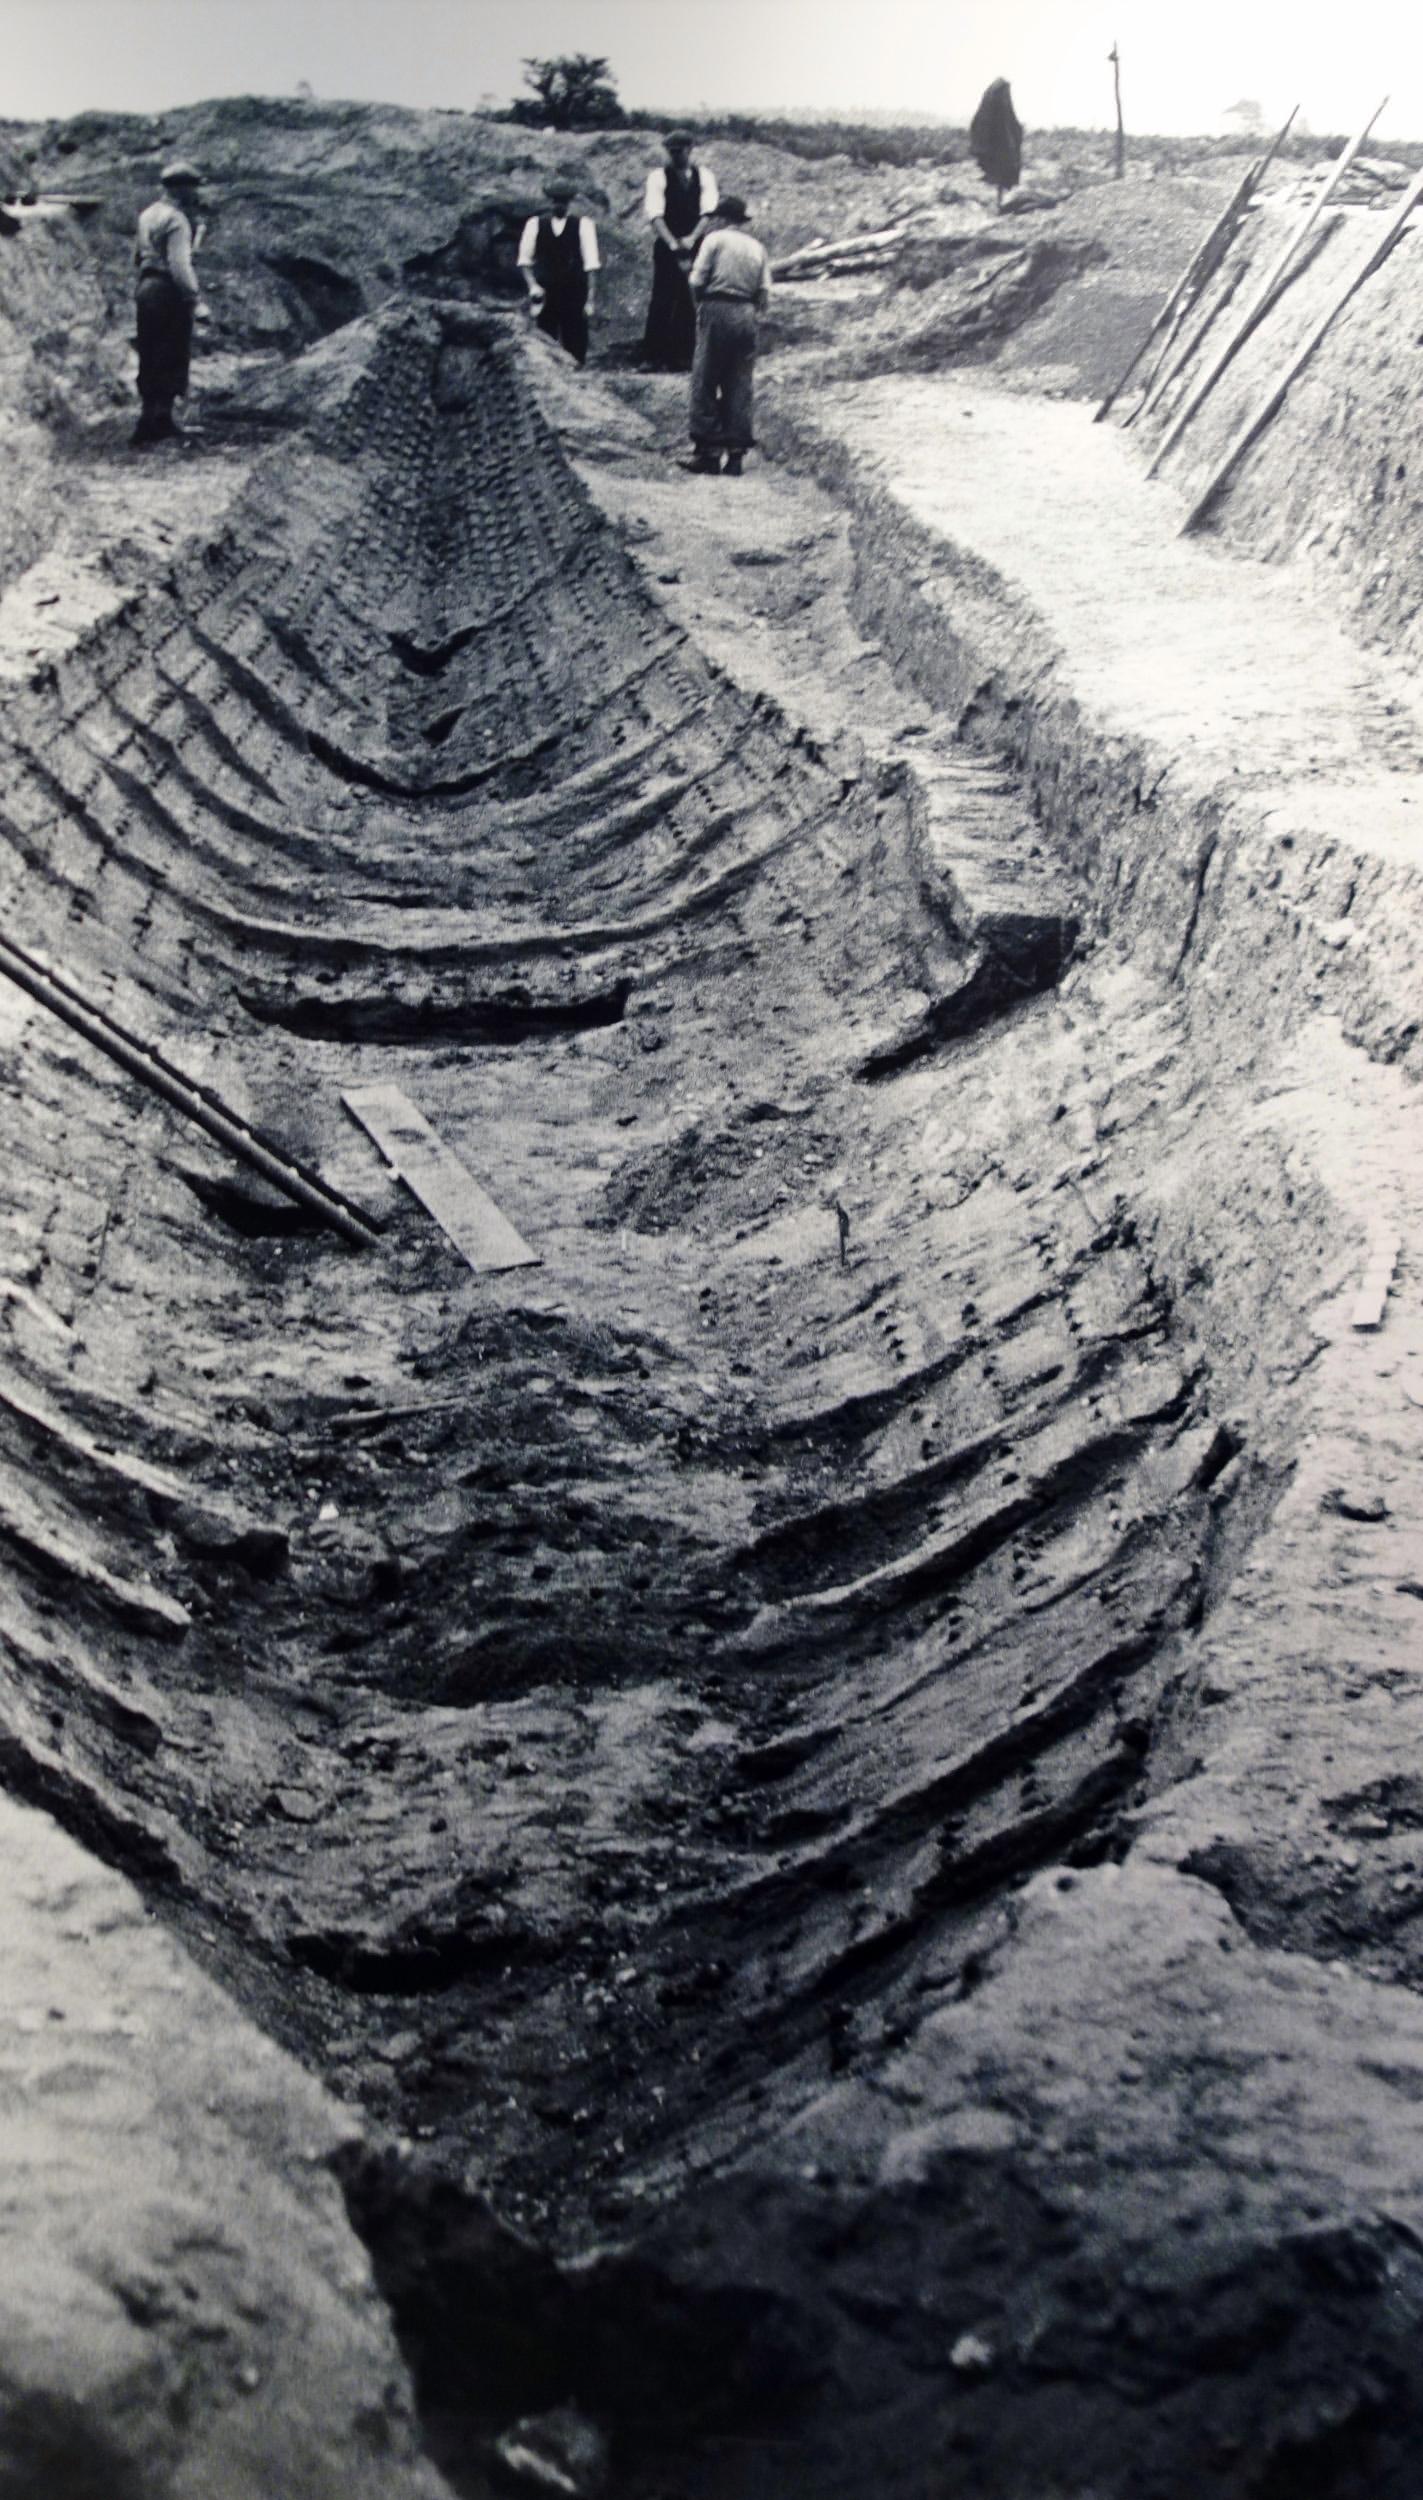 The excavation at Sutton Hoo in 1939